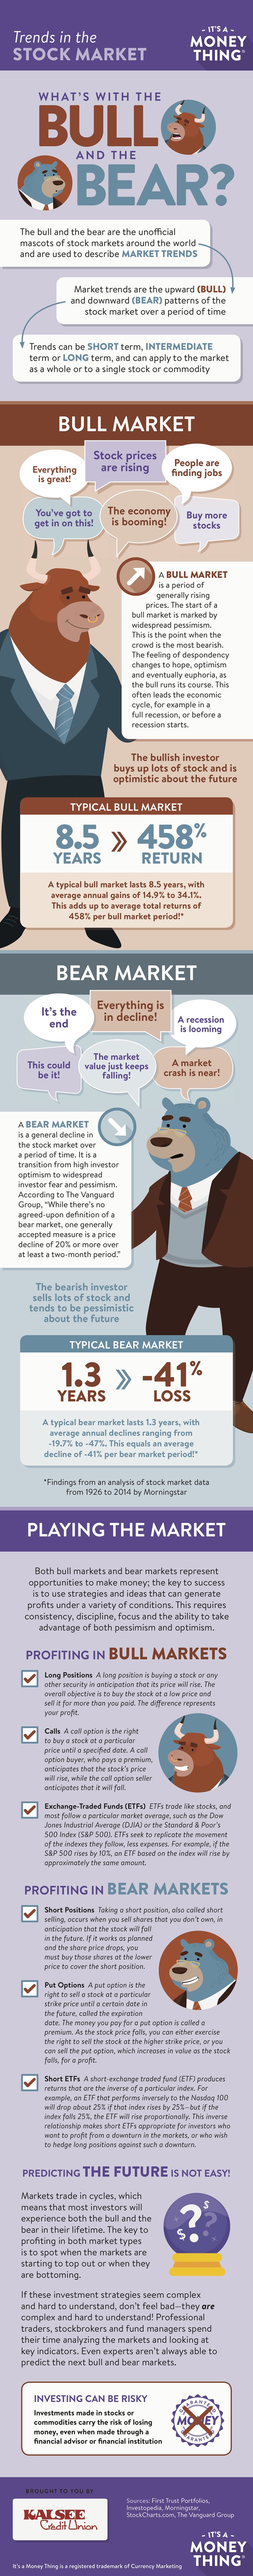 Trends in the stock market infographic, click for transcription